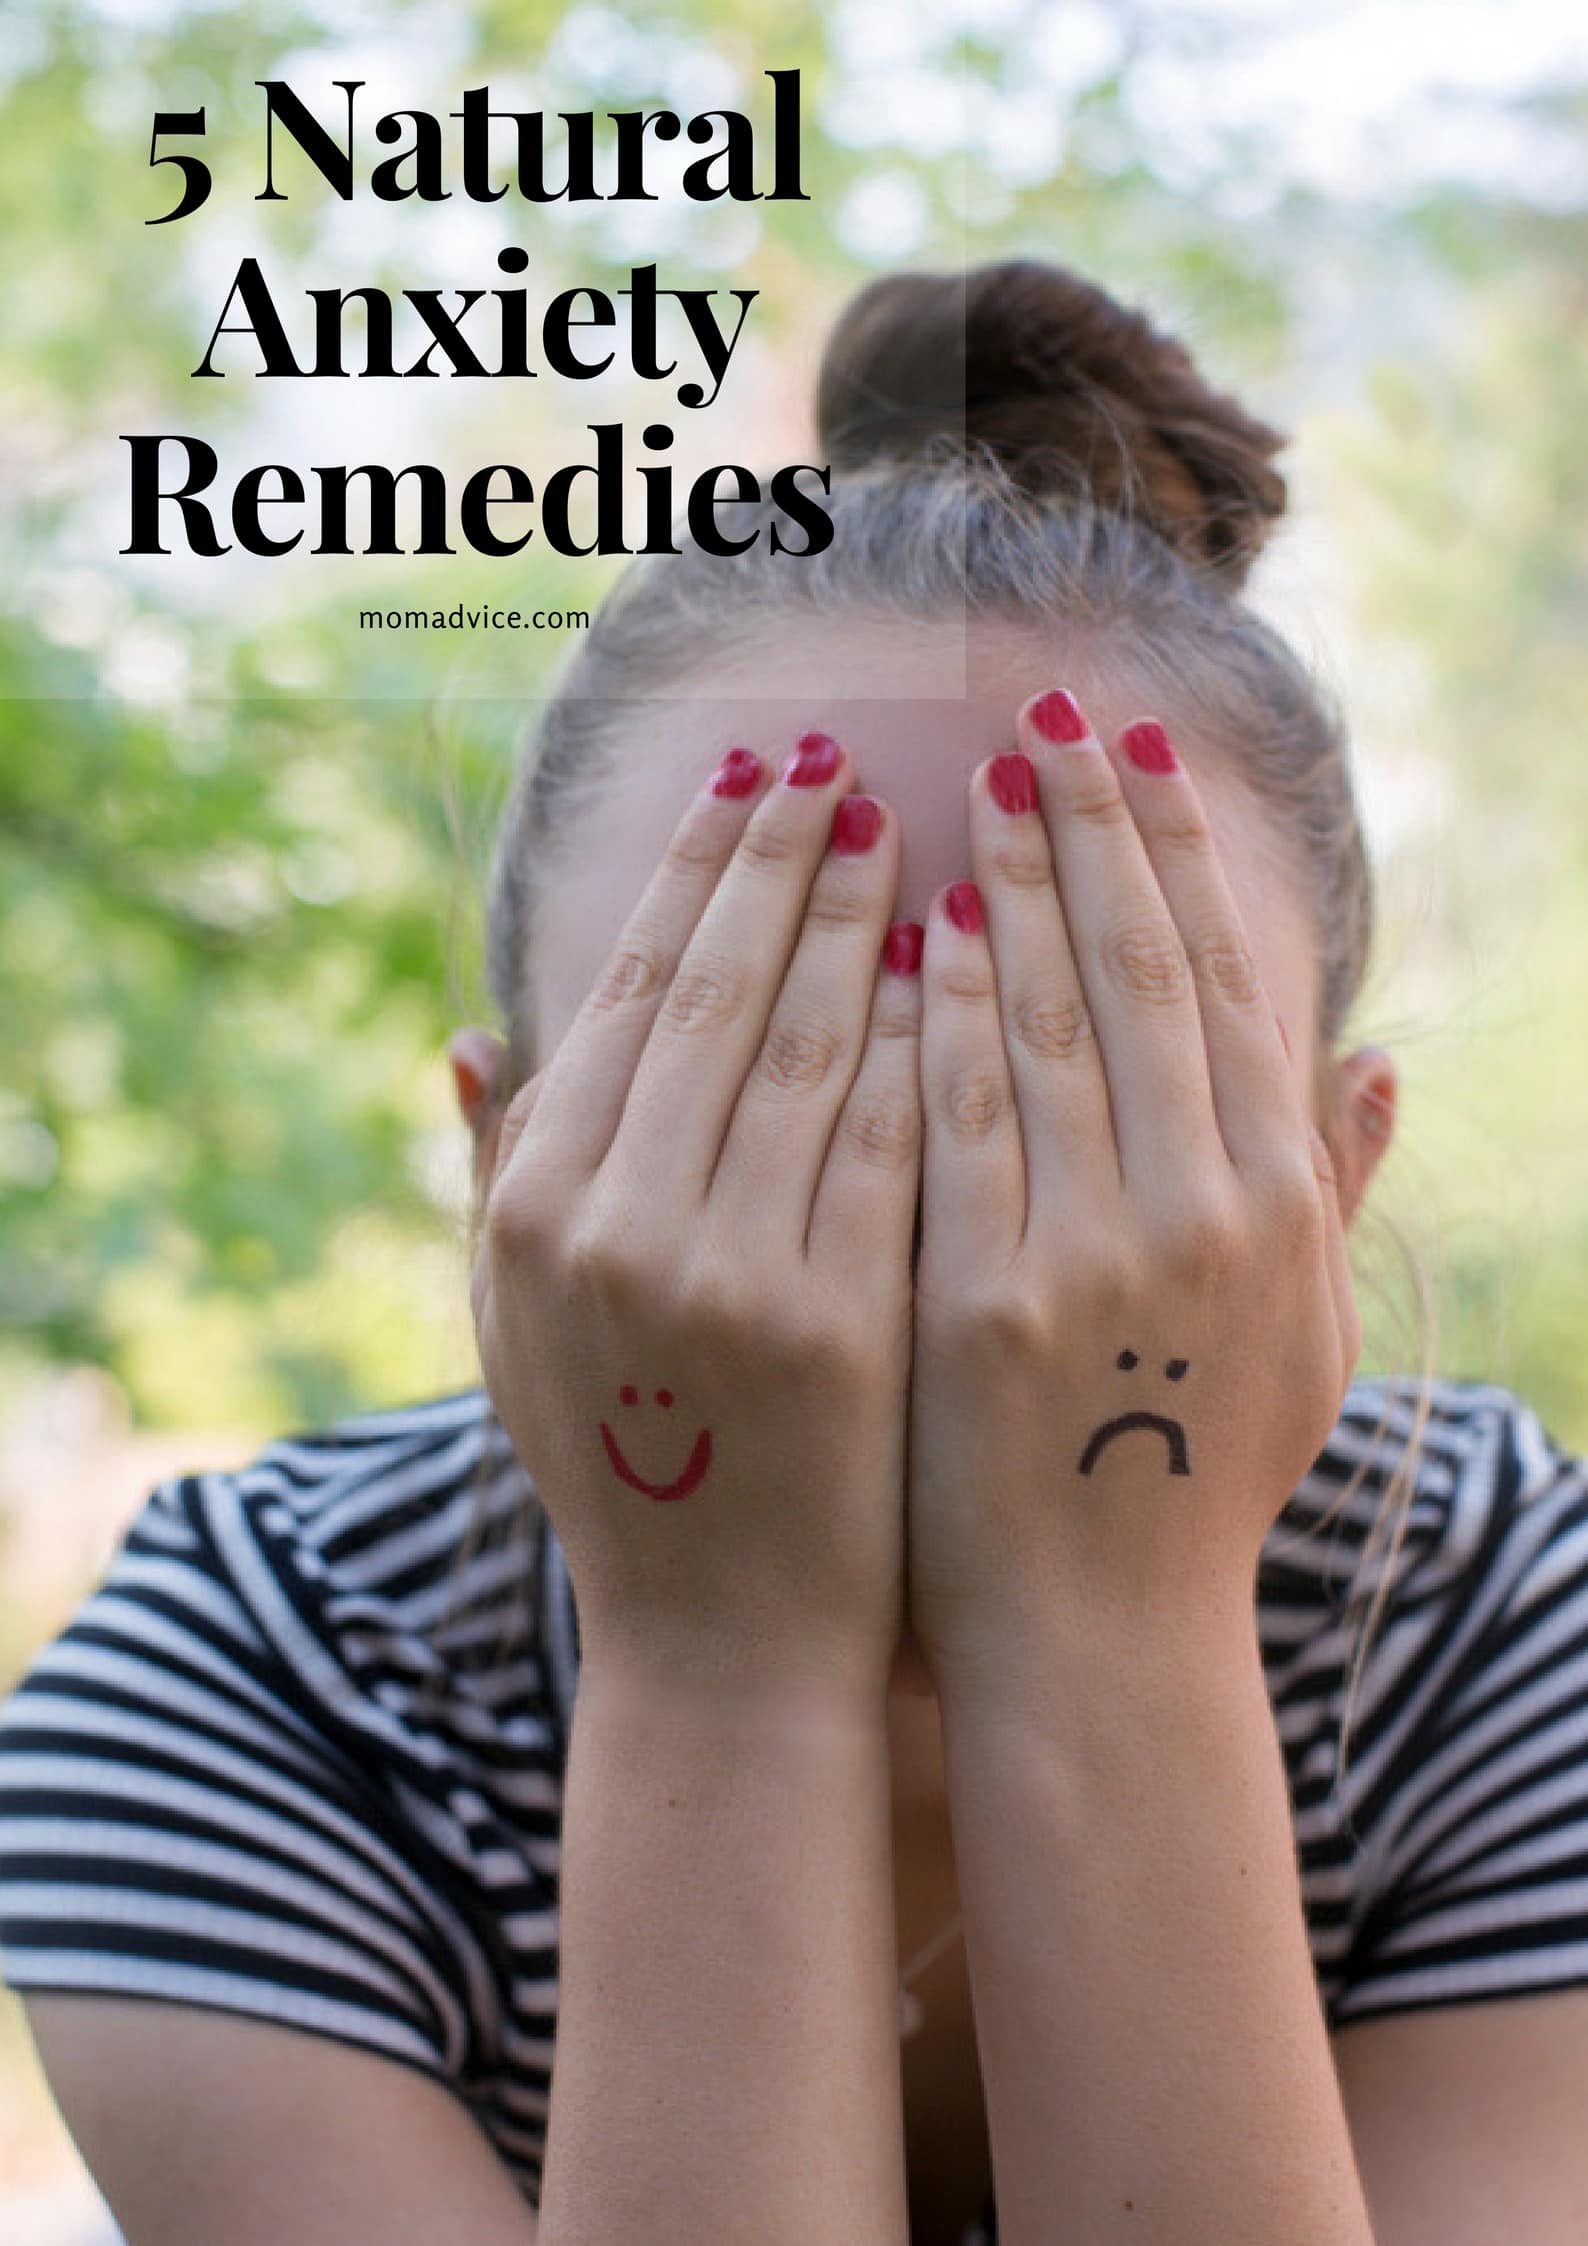 5 Natural Anxiety Remedies